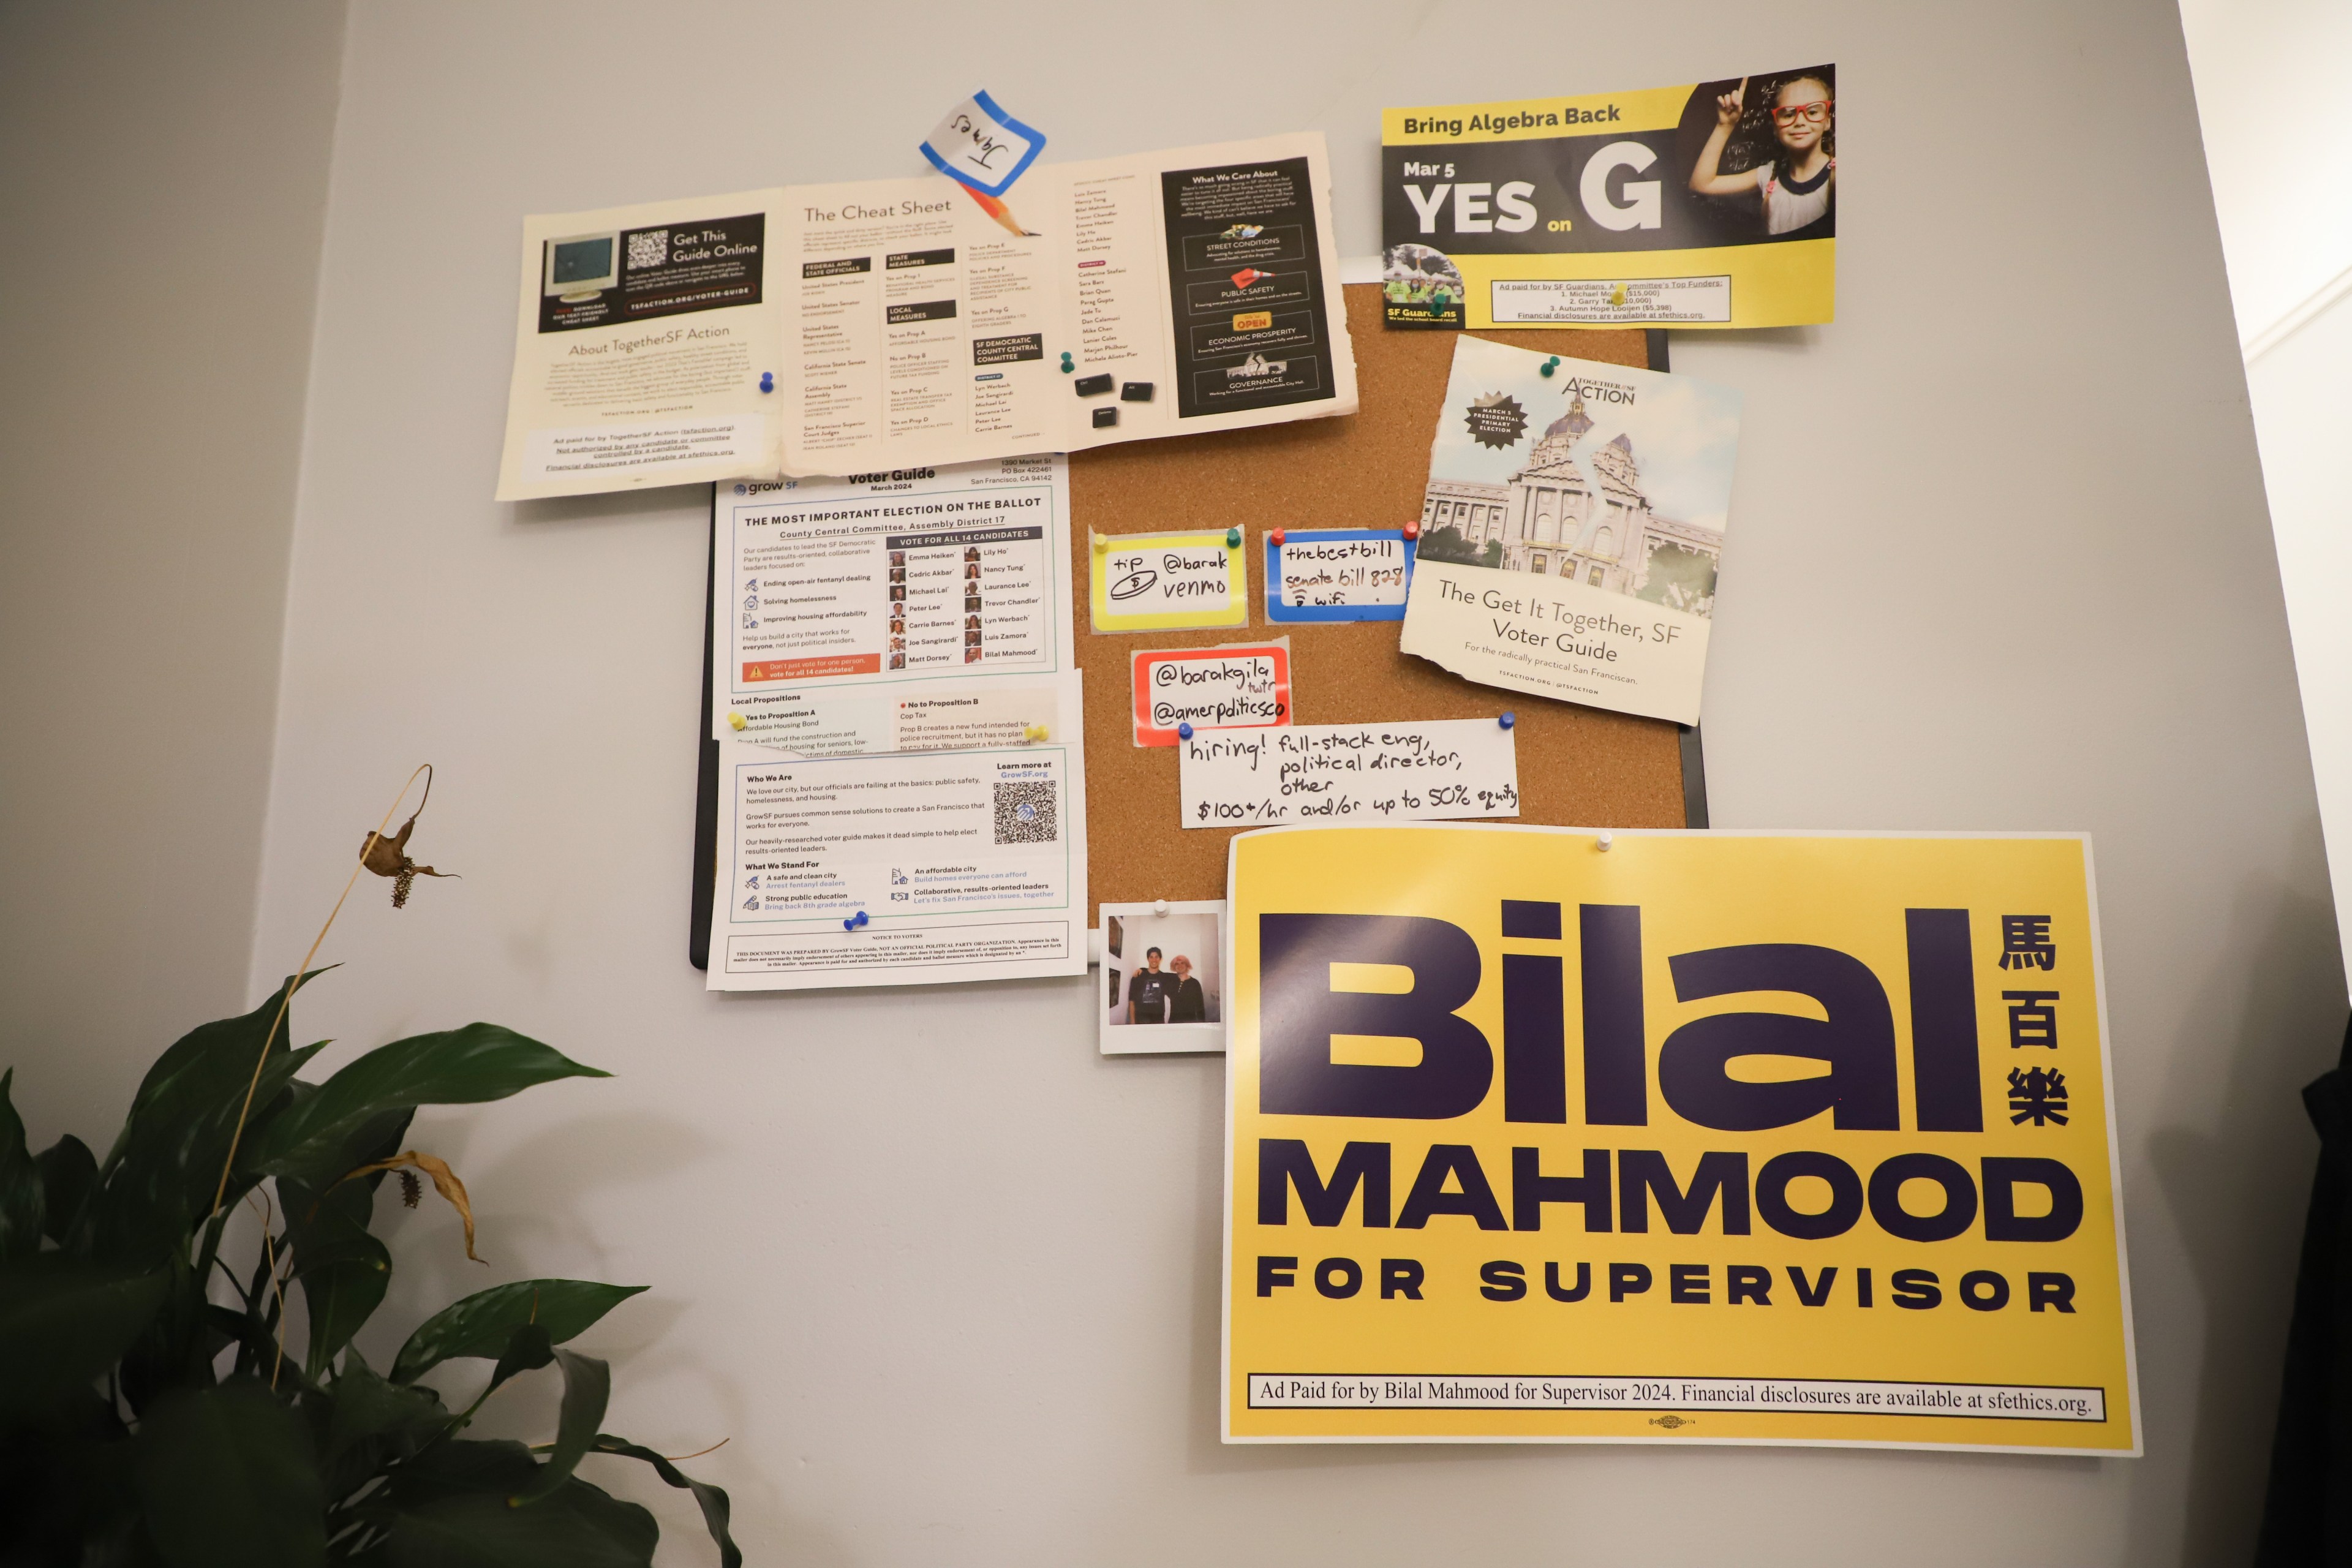 A bulletin board is covered with flyers, notes, and a political signs.